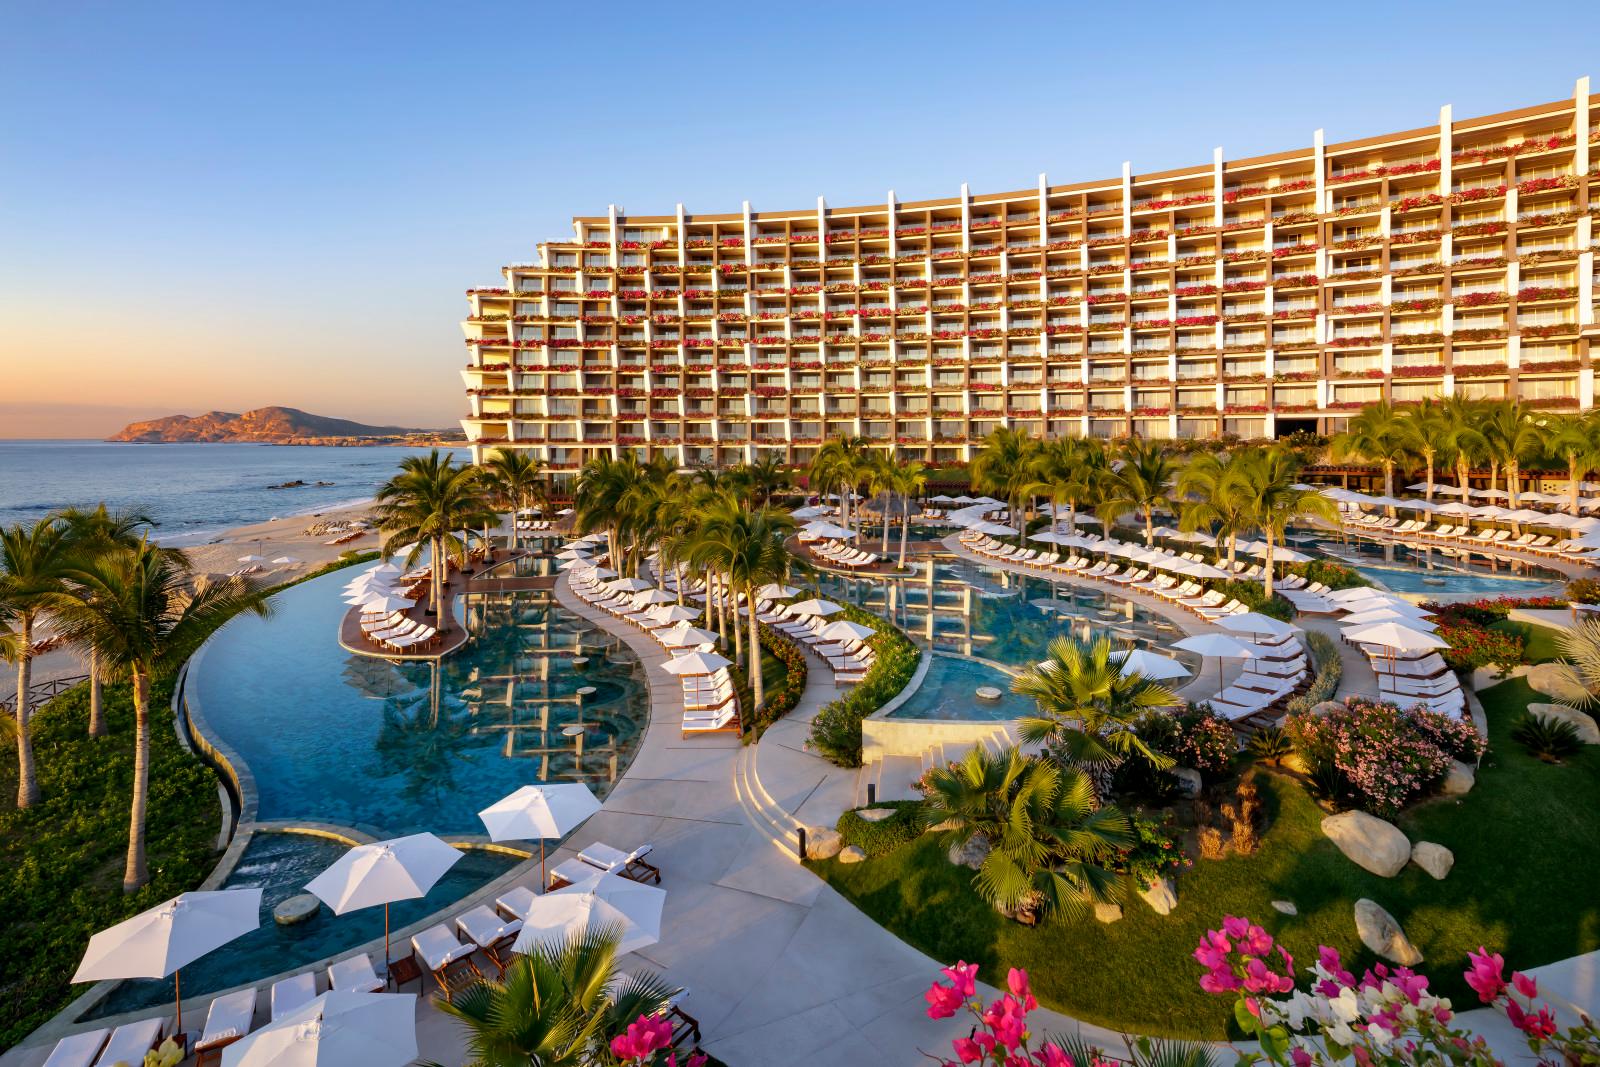 Vegans Can Now Enjoy A Luxury Vacation at Grand Velas Los Cabos